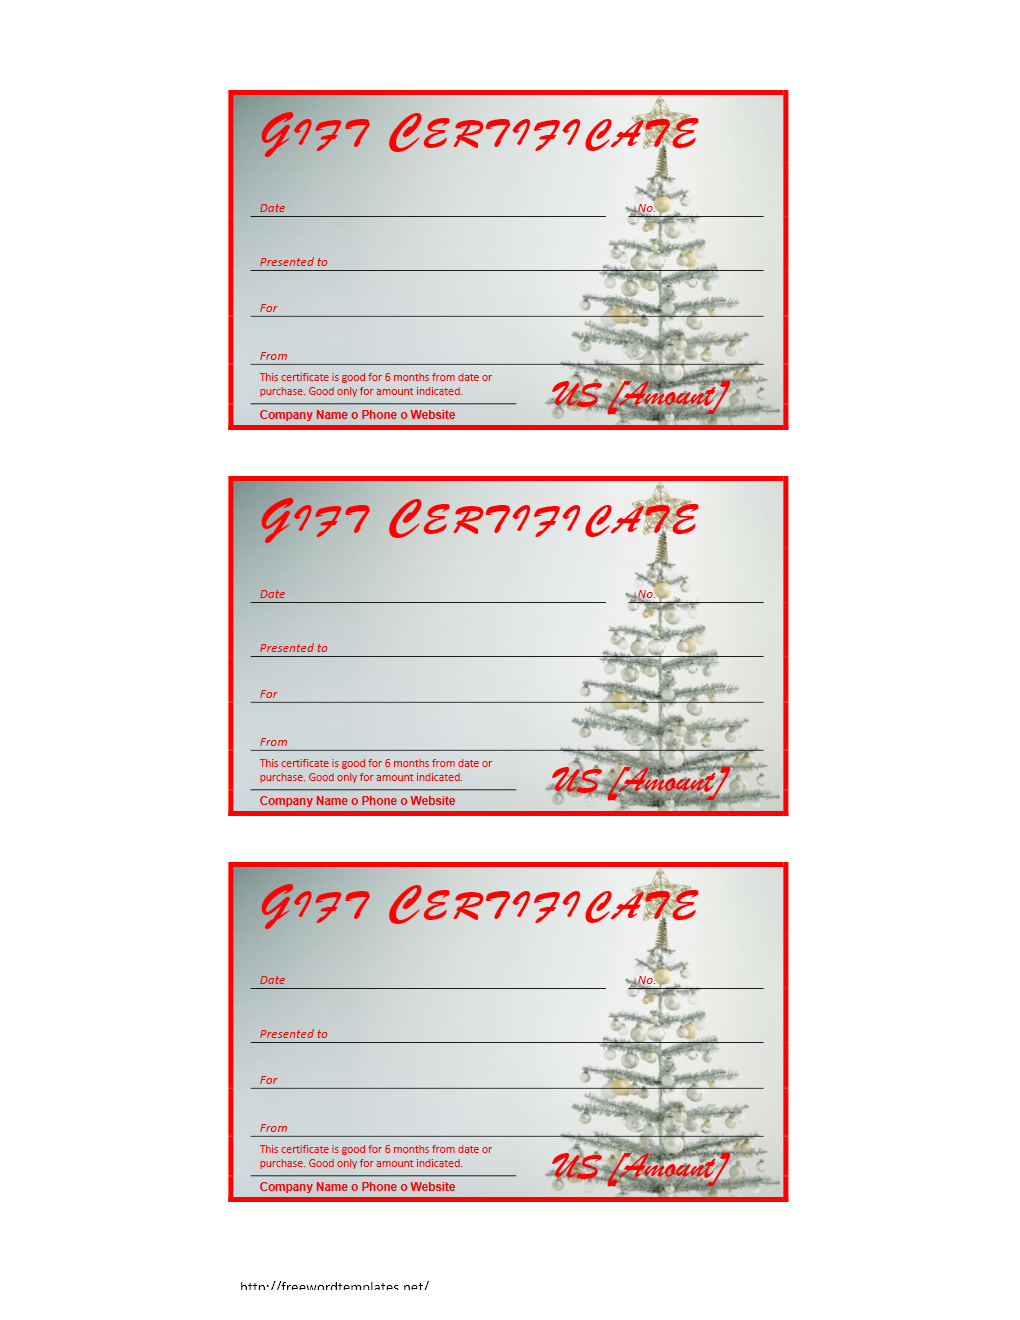 Free Gift Certificate Archives | Freewordtemplates - Free Printable Christmas Gift Voucher Templates